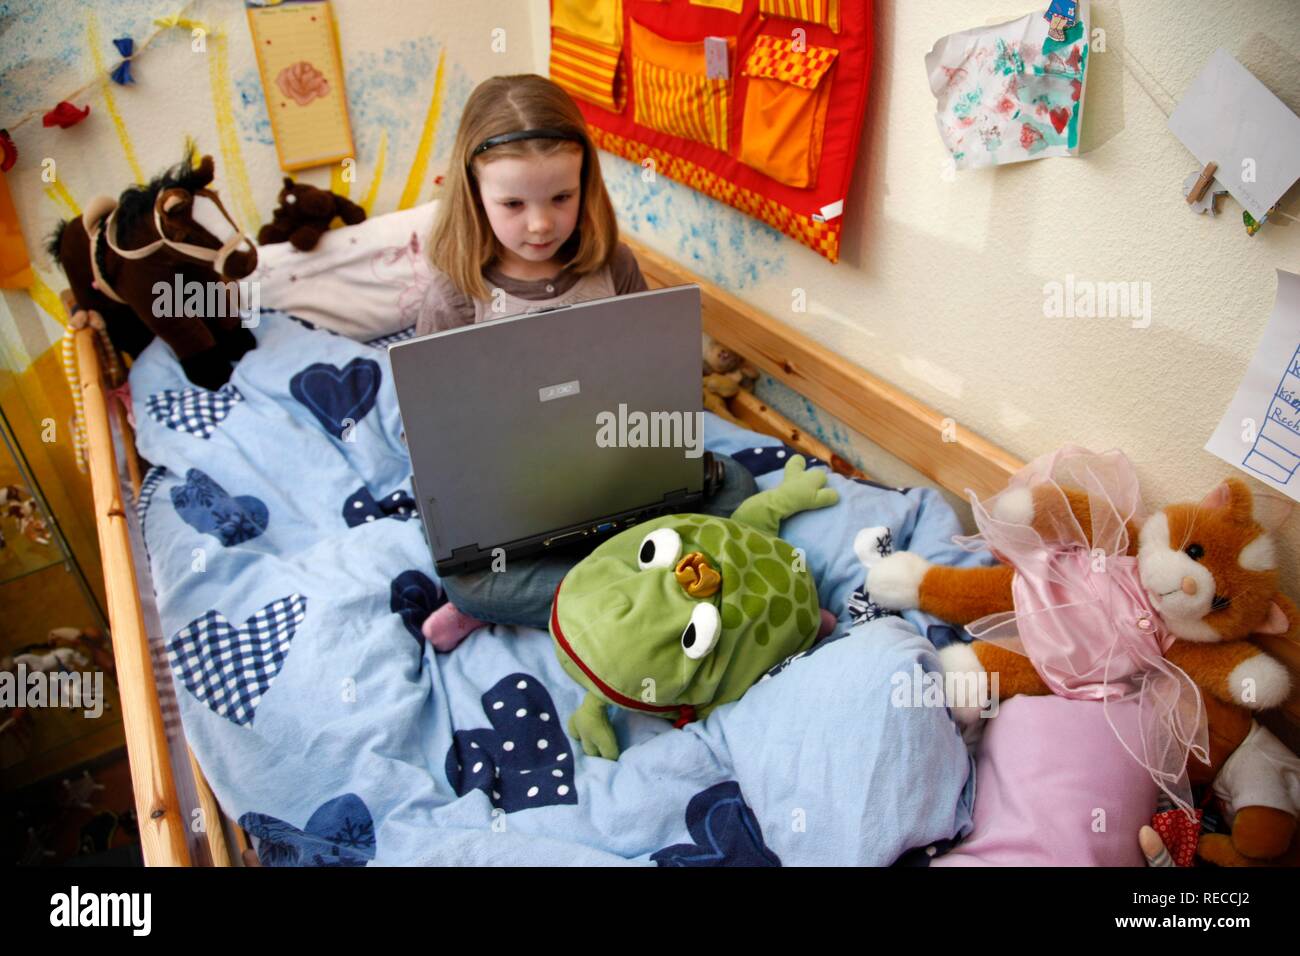 Girl 7 Years Old Working With A Computer At Home In Her Room